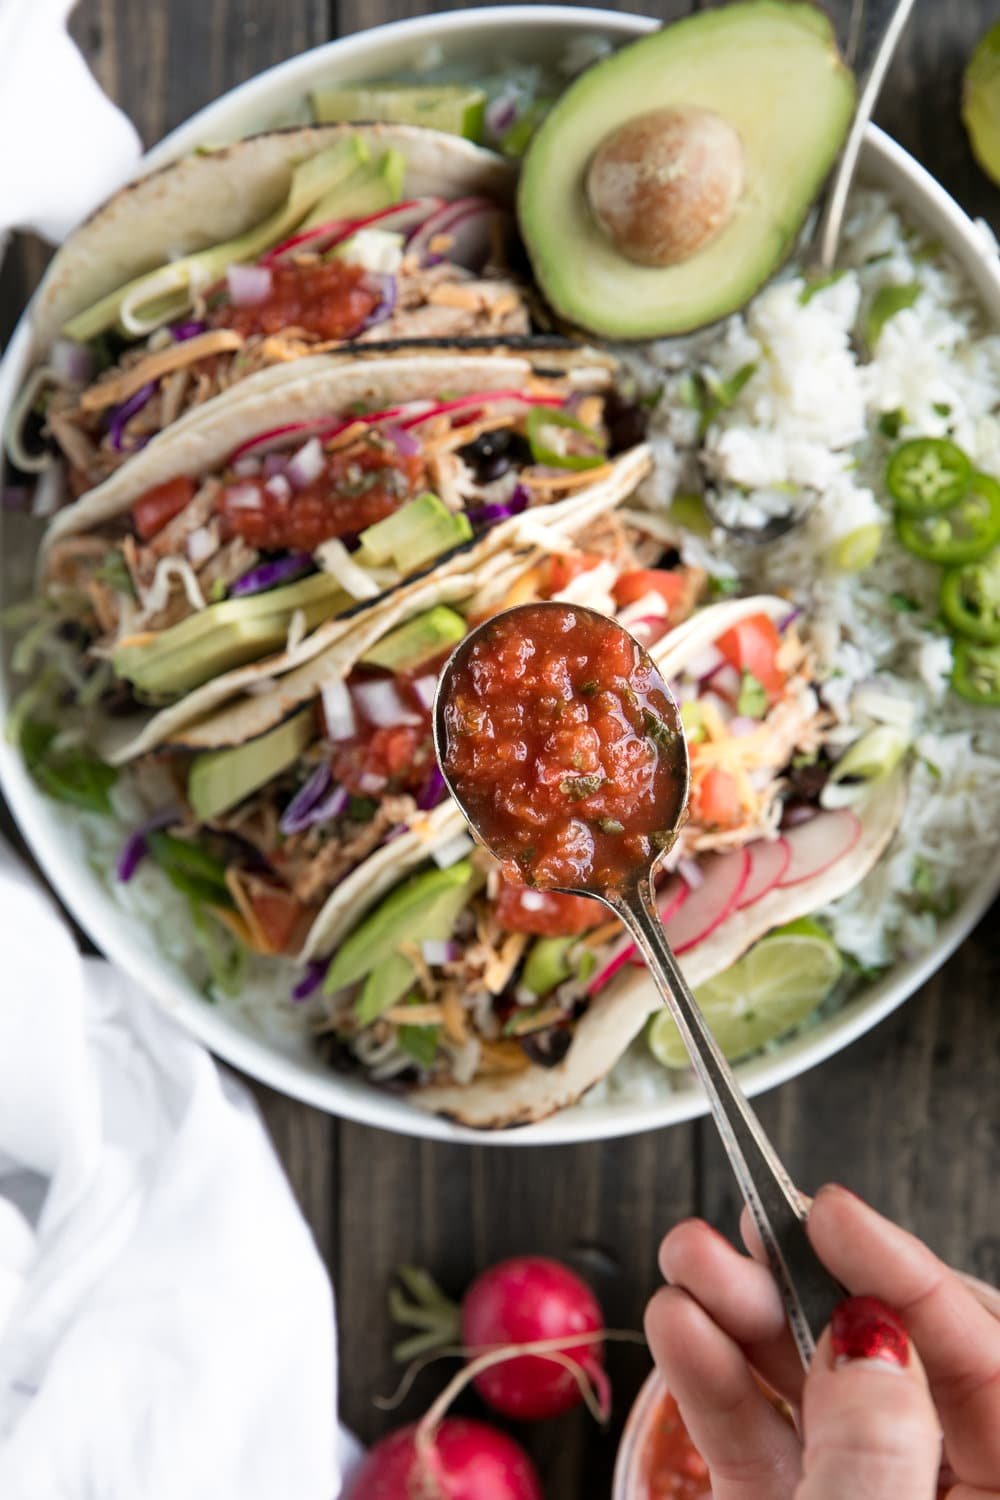 30 Minute Instant Pot Shredded Salsa Chicken Tacos with Cilantro Lime Rice, Shredded Cheese, and Black Beans (+ Video)